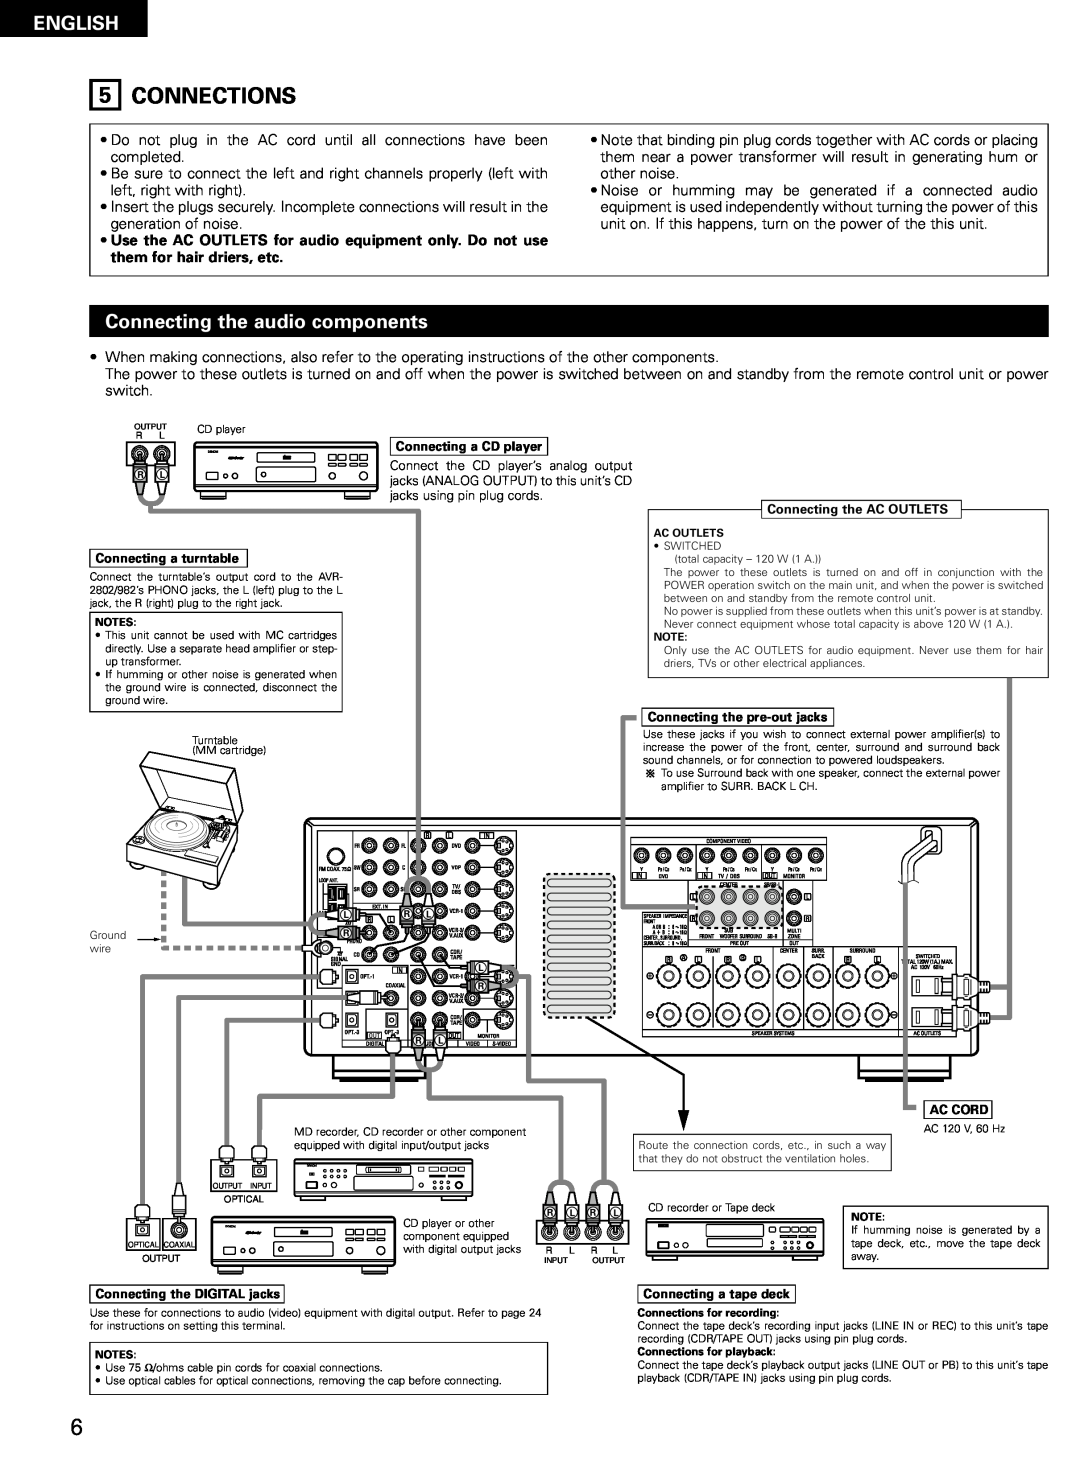 Denon AVR-2802/982 operating instructions Connections, English, Connecting the audio components 